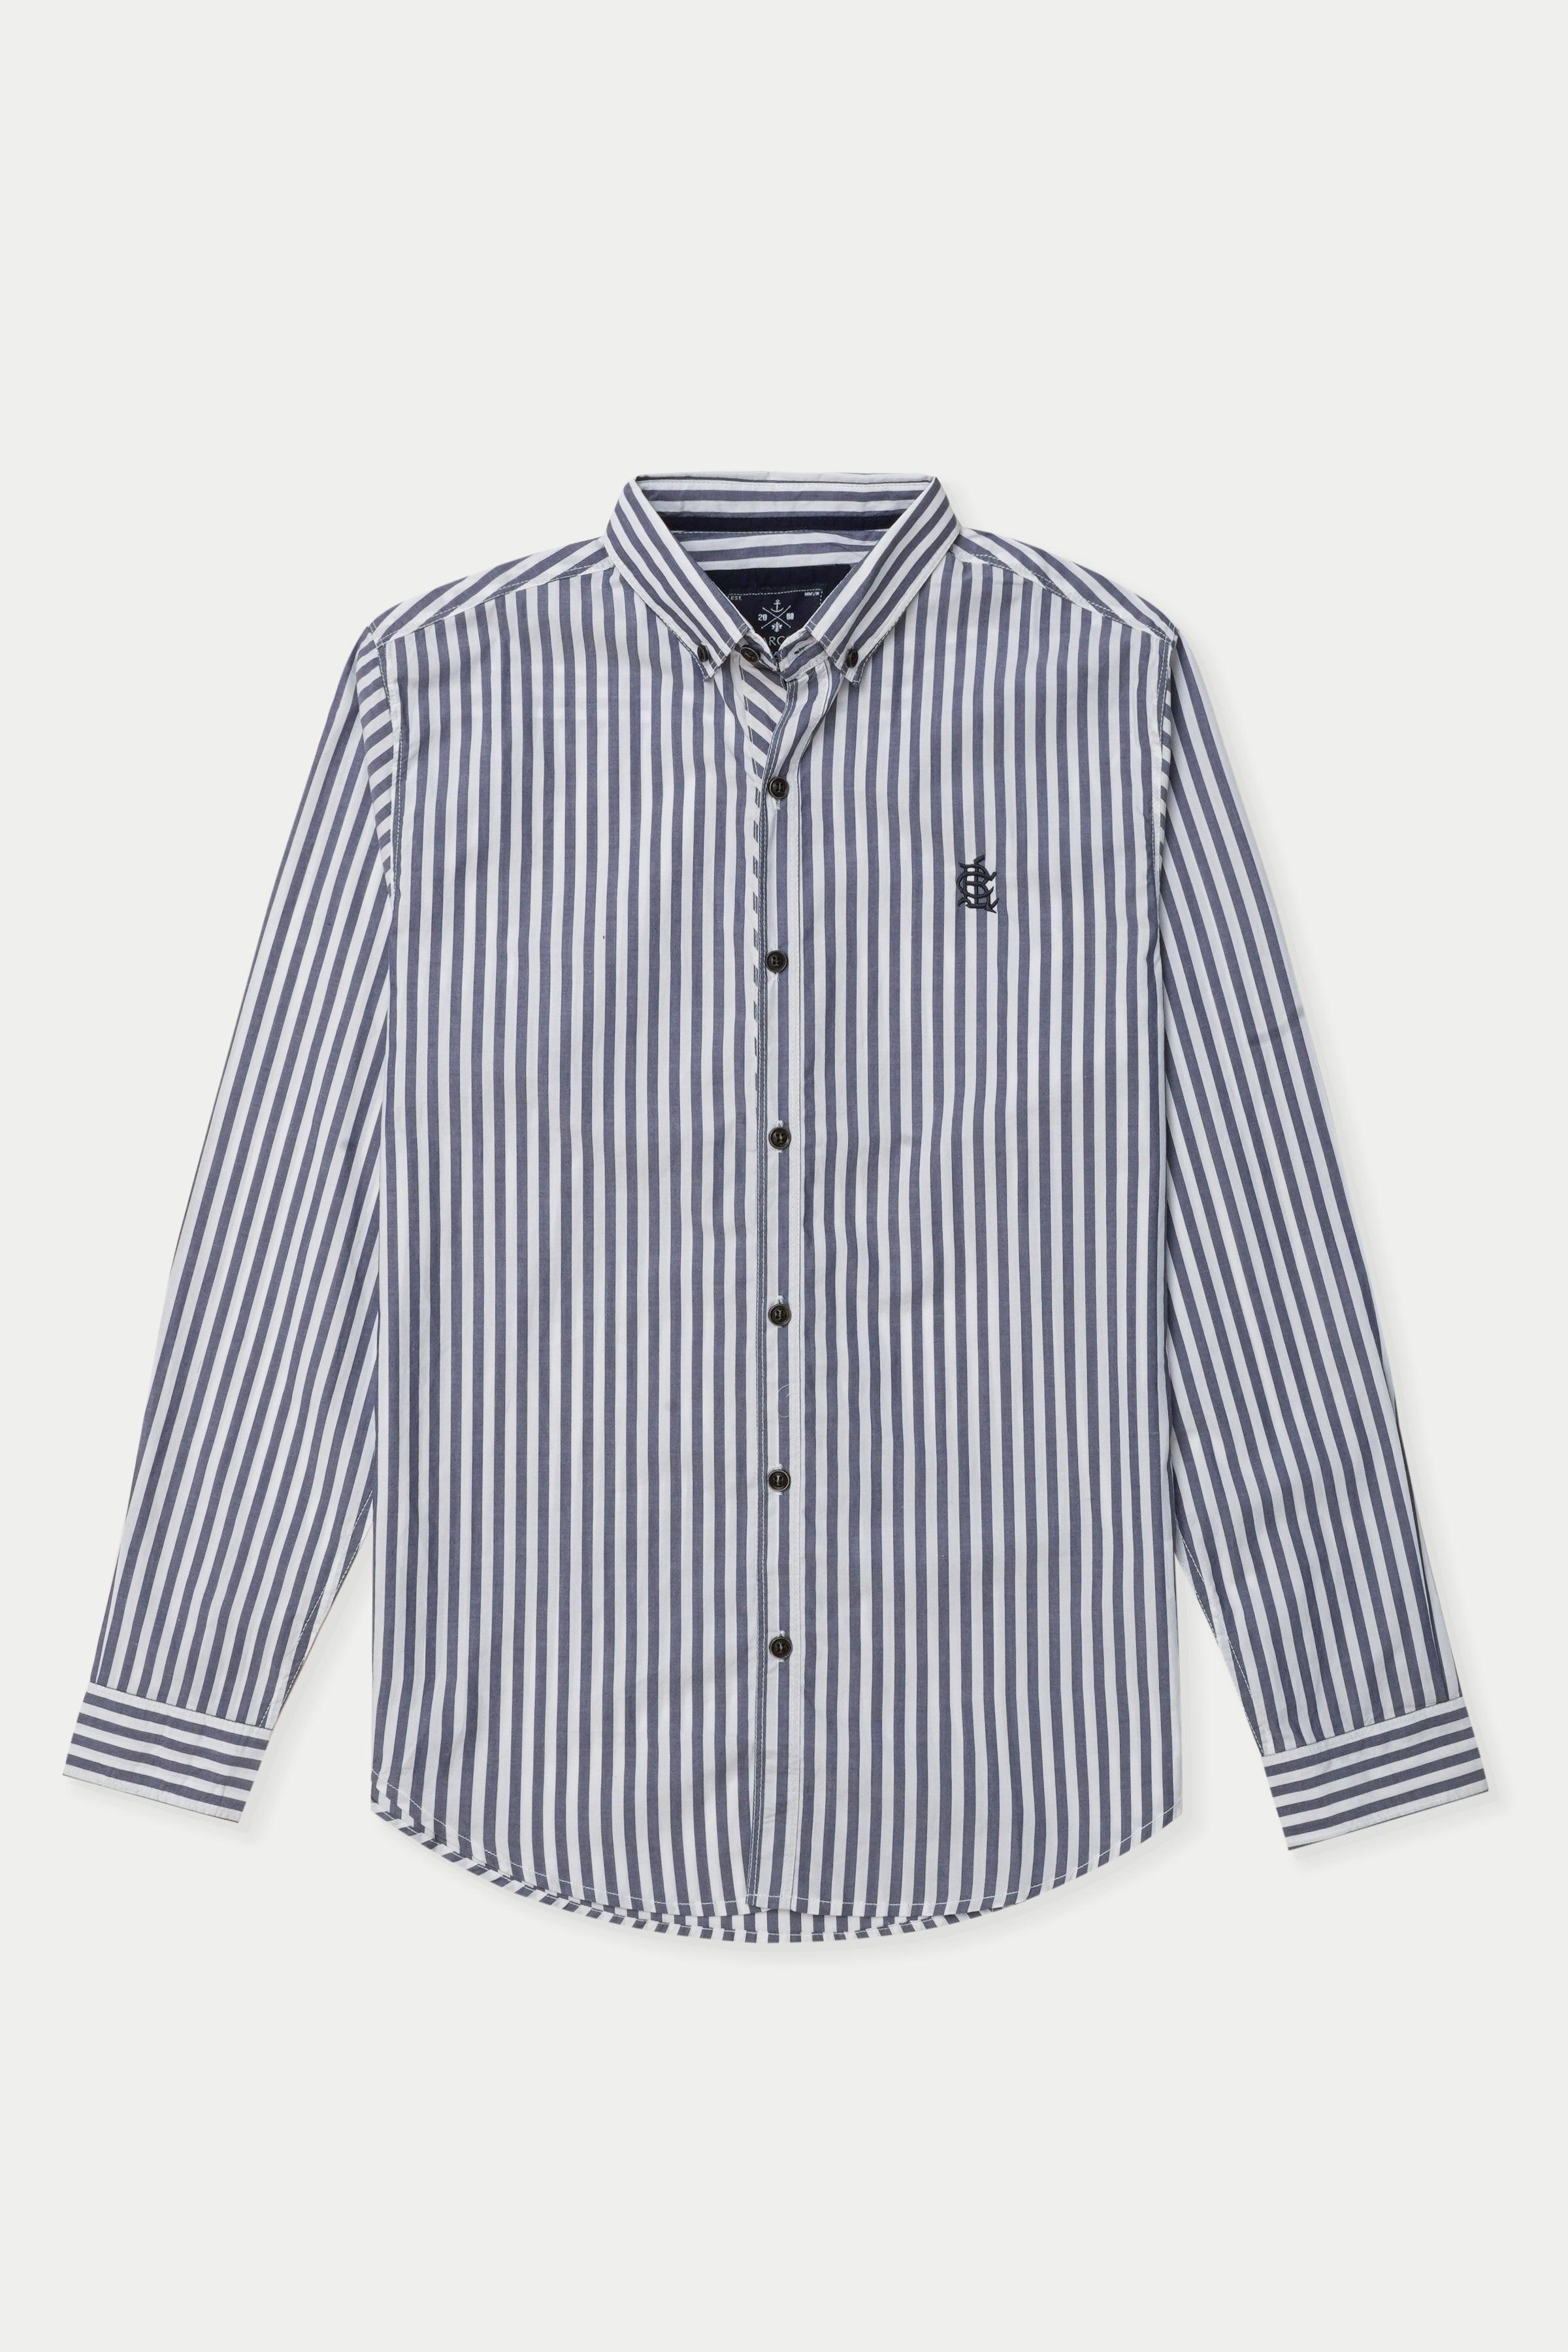 CASUAL SHIRT BLUE WHITE at Charcoal Clothing